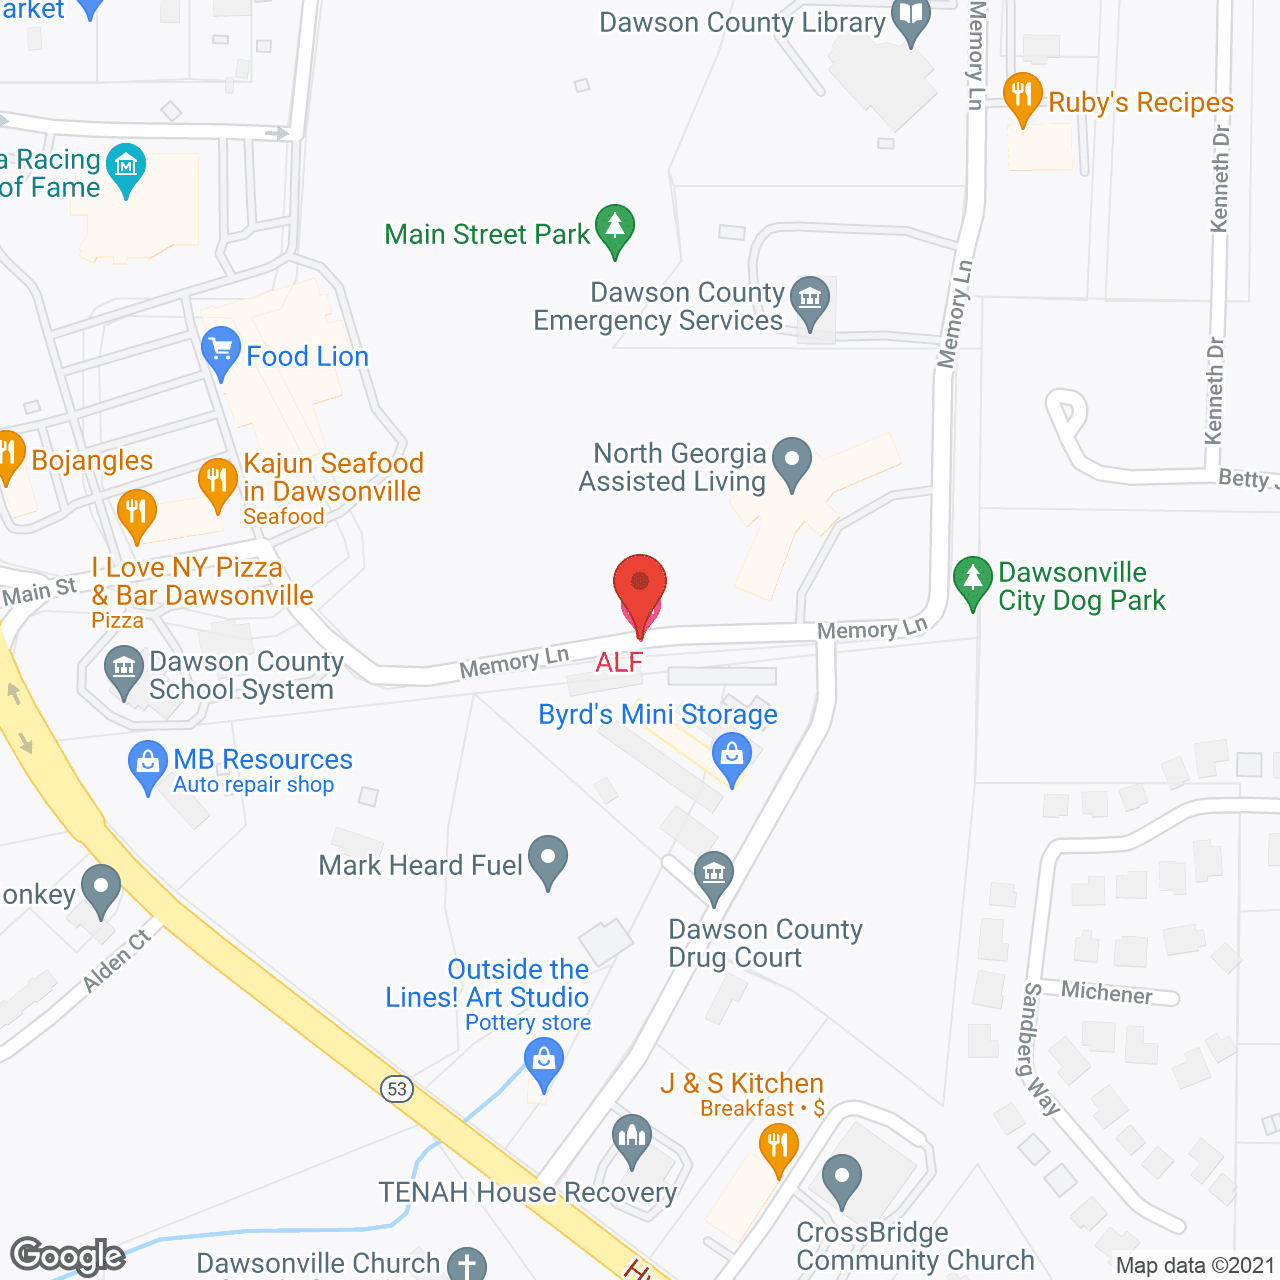 North Georgia Assisted Living in google map